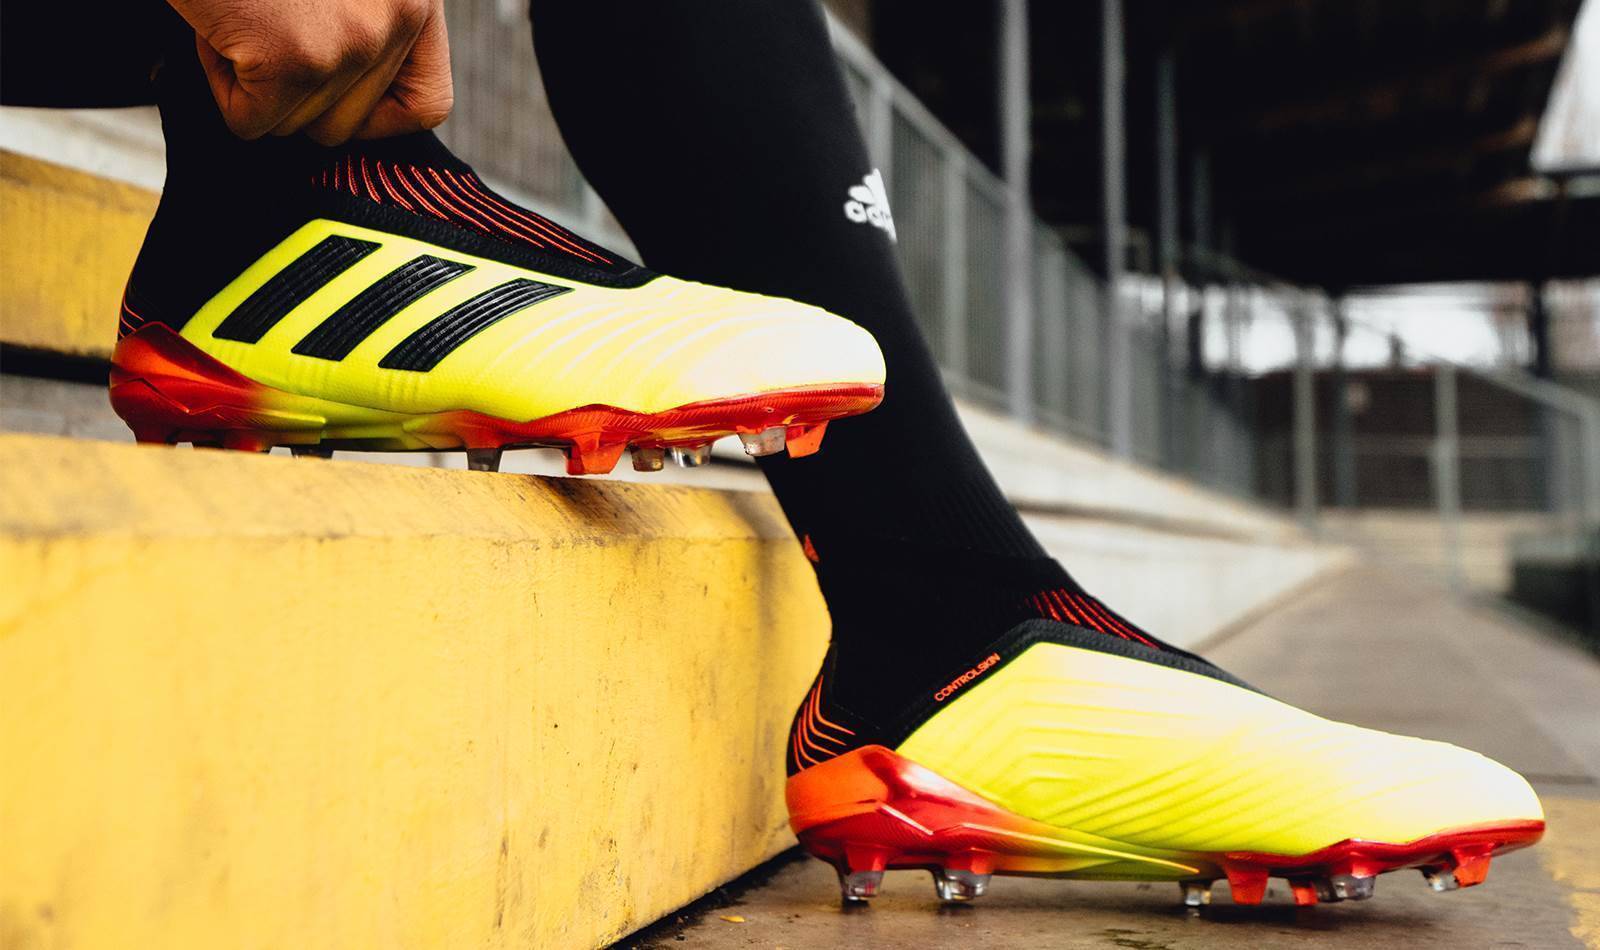 adidas unveil stunning Mode Predator 18+ - FTBL The home of football in